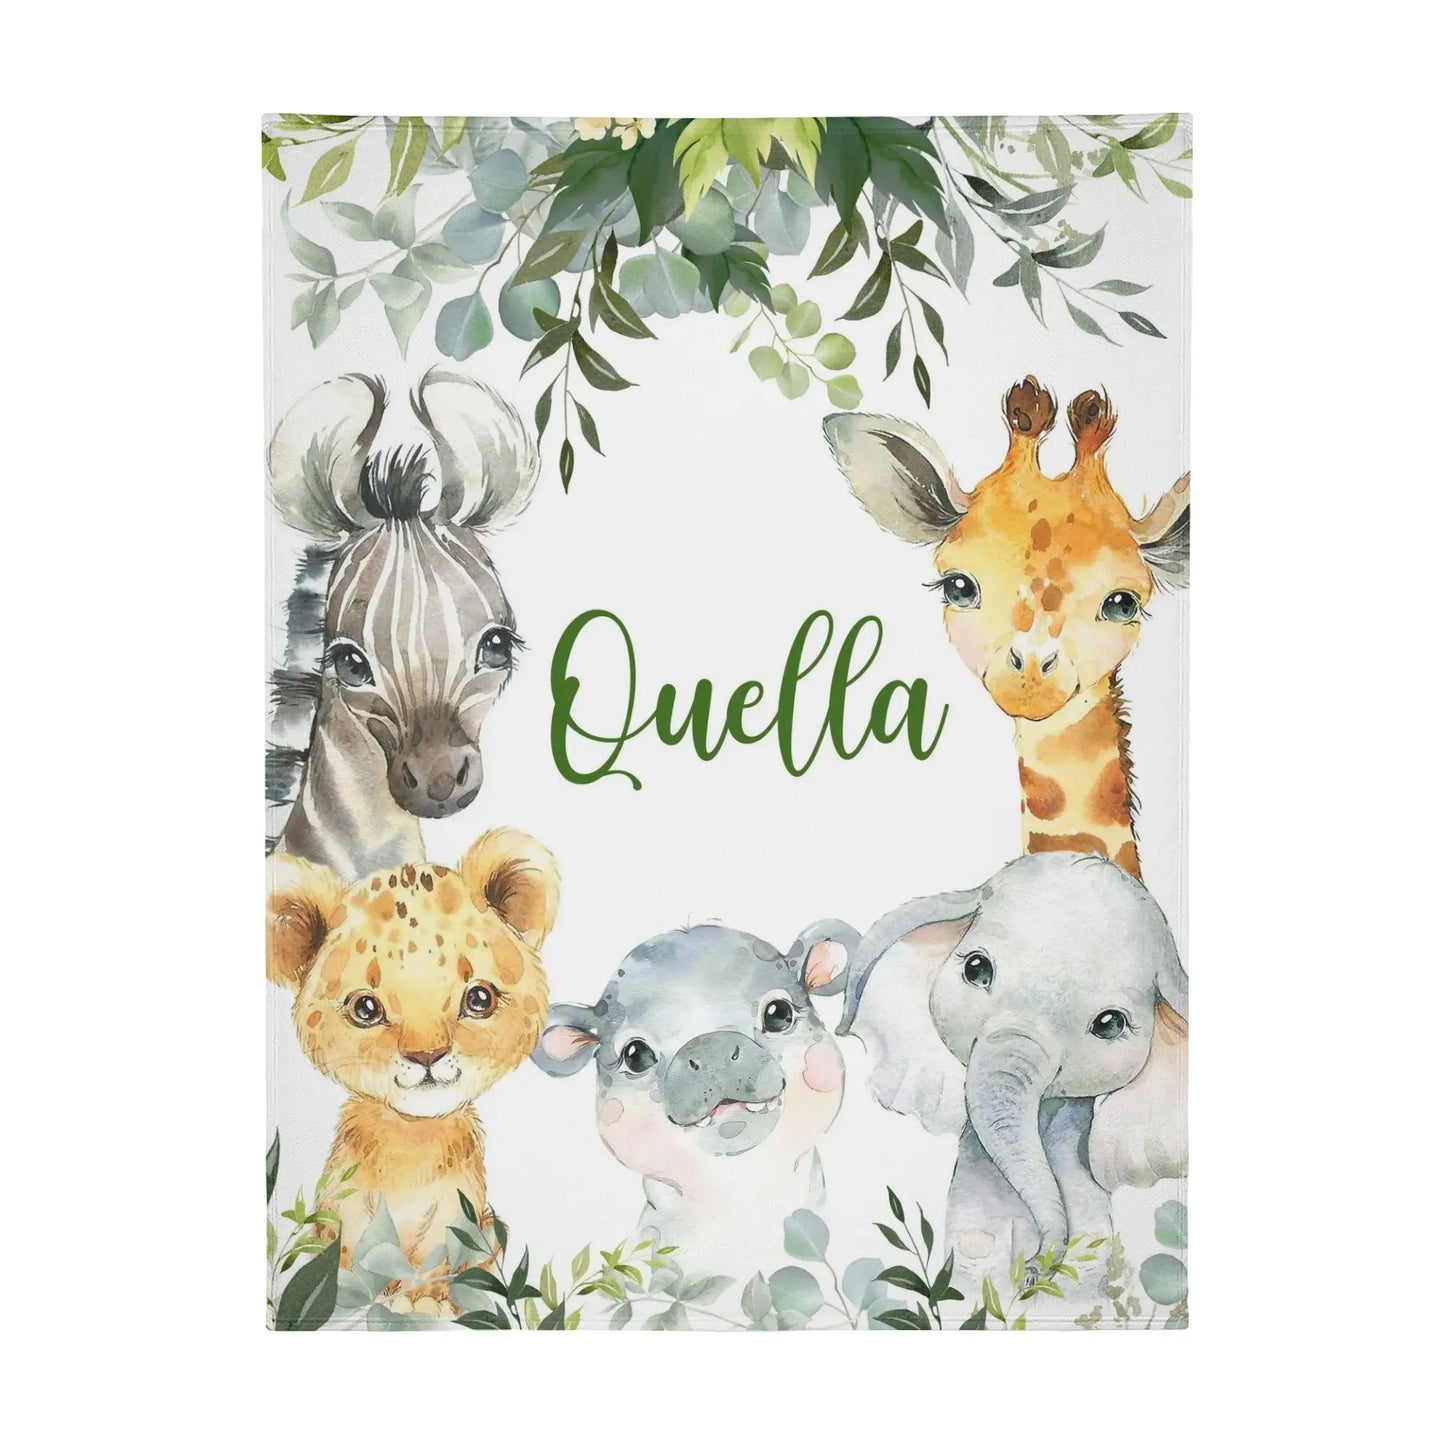 Personalized Safari Animal Party Blanket - Gift for Baby